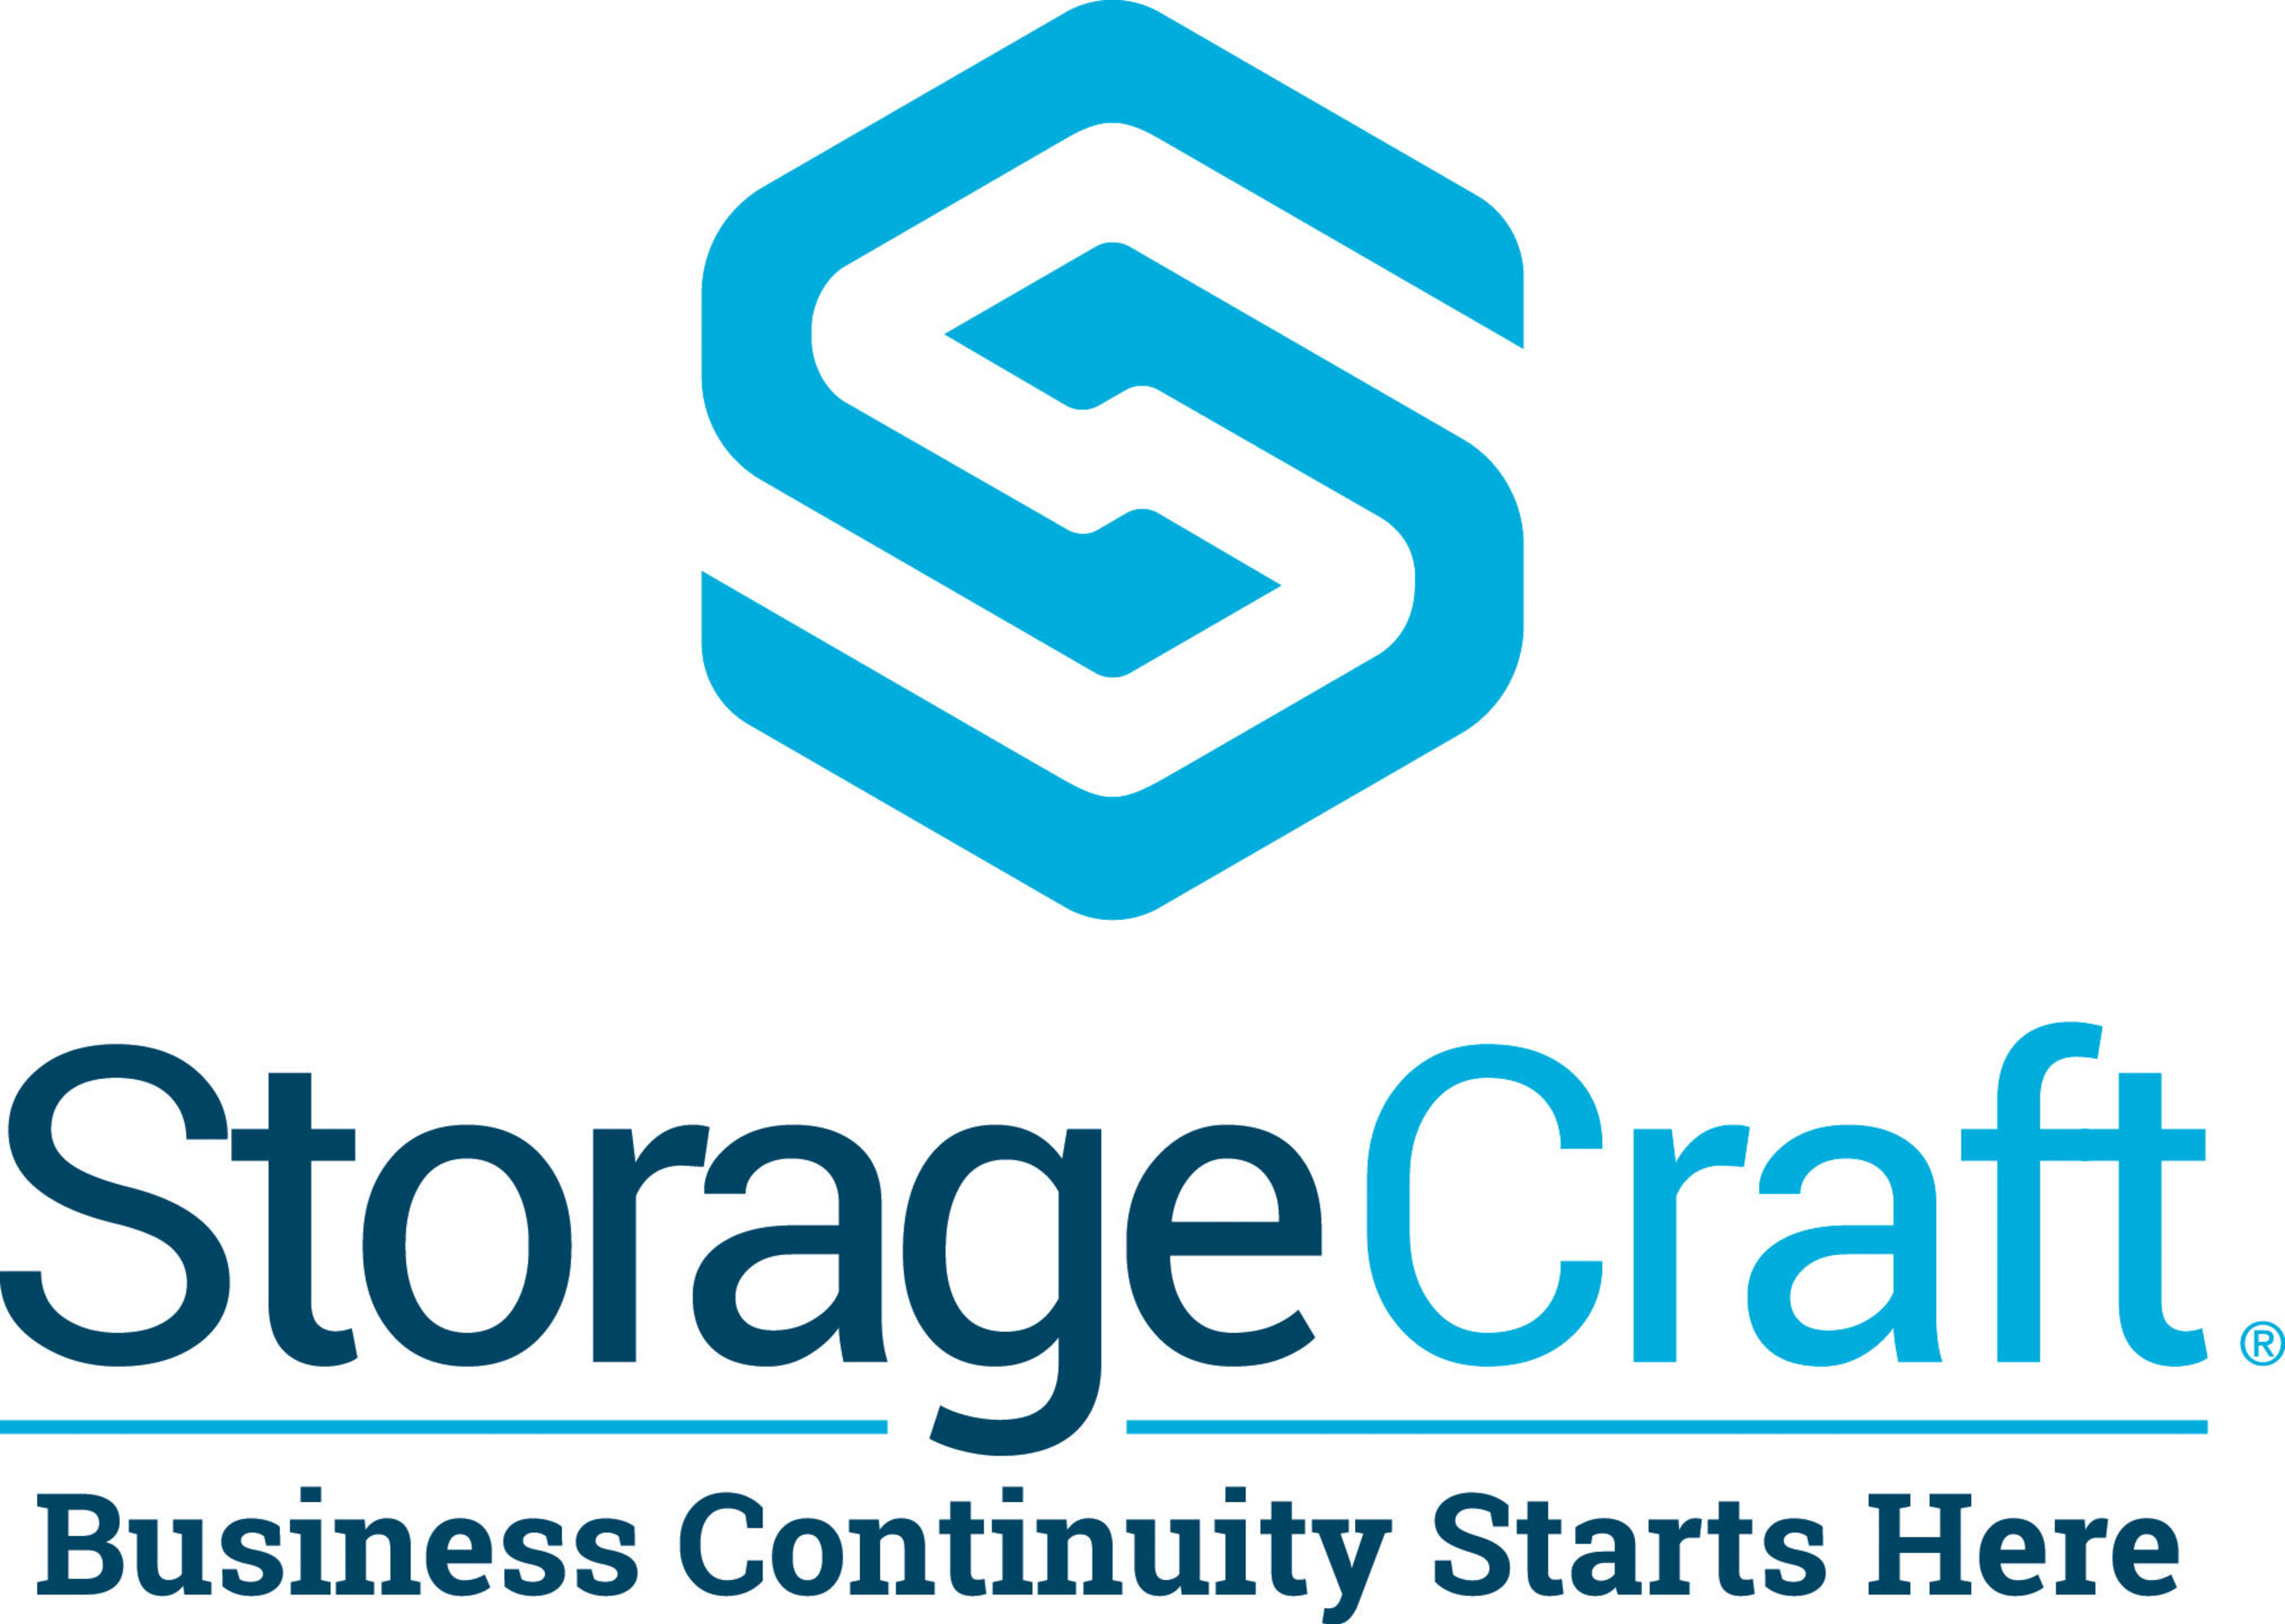 StorageCraft Technology Corporation provides best-in-class backup, disaster recovery, system migration, data protection, and cloud services solutions for servers, desktops and laptops. StorageCraft delivers software and services solutions that enable users to maintain business continuity during times of disaster, computer outages, or other unforeseen events by reducing downtime, improving security and stability for systems and data. For more information, visit  www.storagecraft.com . (PRNewsFoto/StorageCraft Technology Corporation) (PRNewsFoto/)